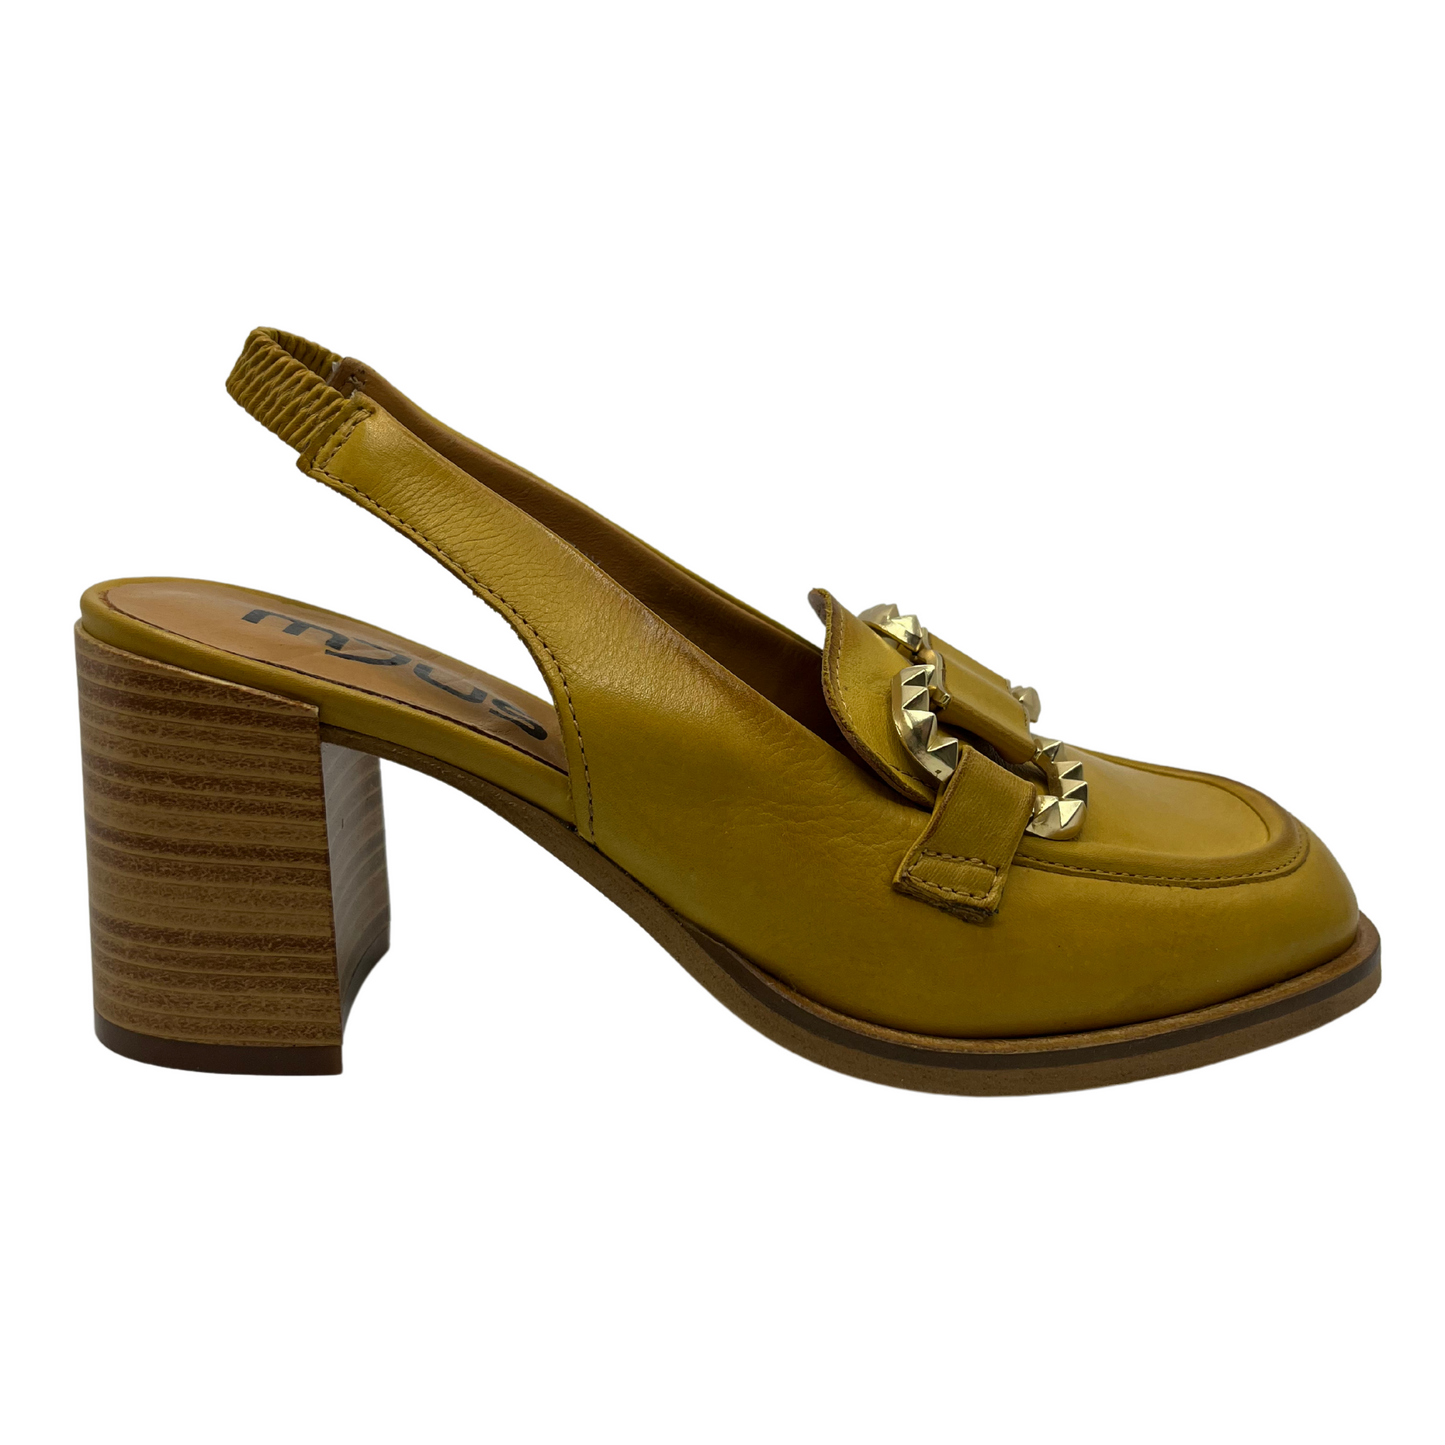 Right facing view of mustard yellow heeled loafer with block heel and slingback strap